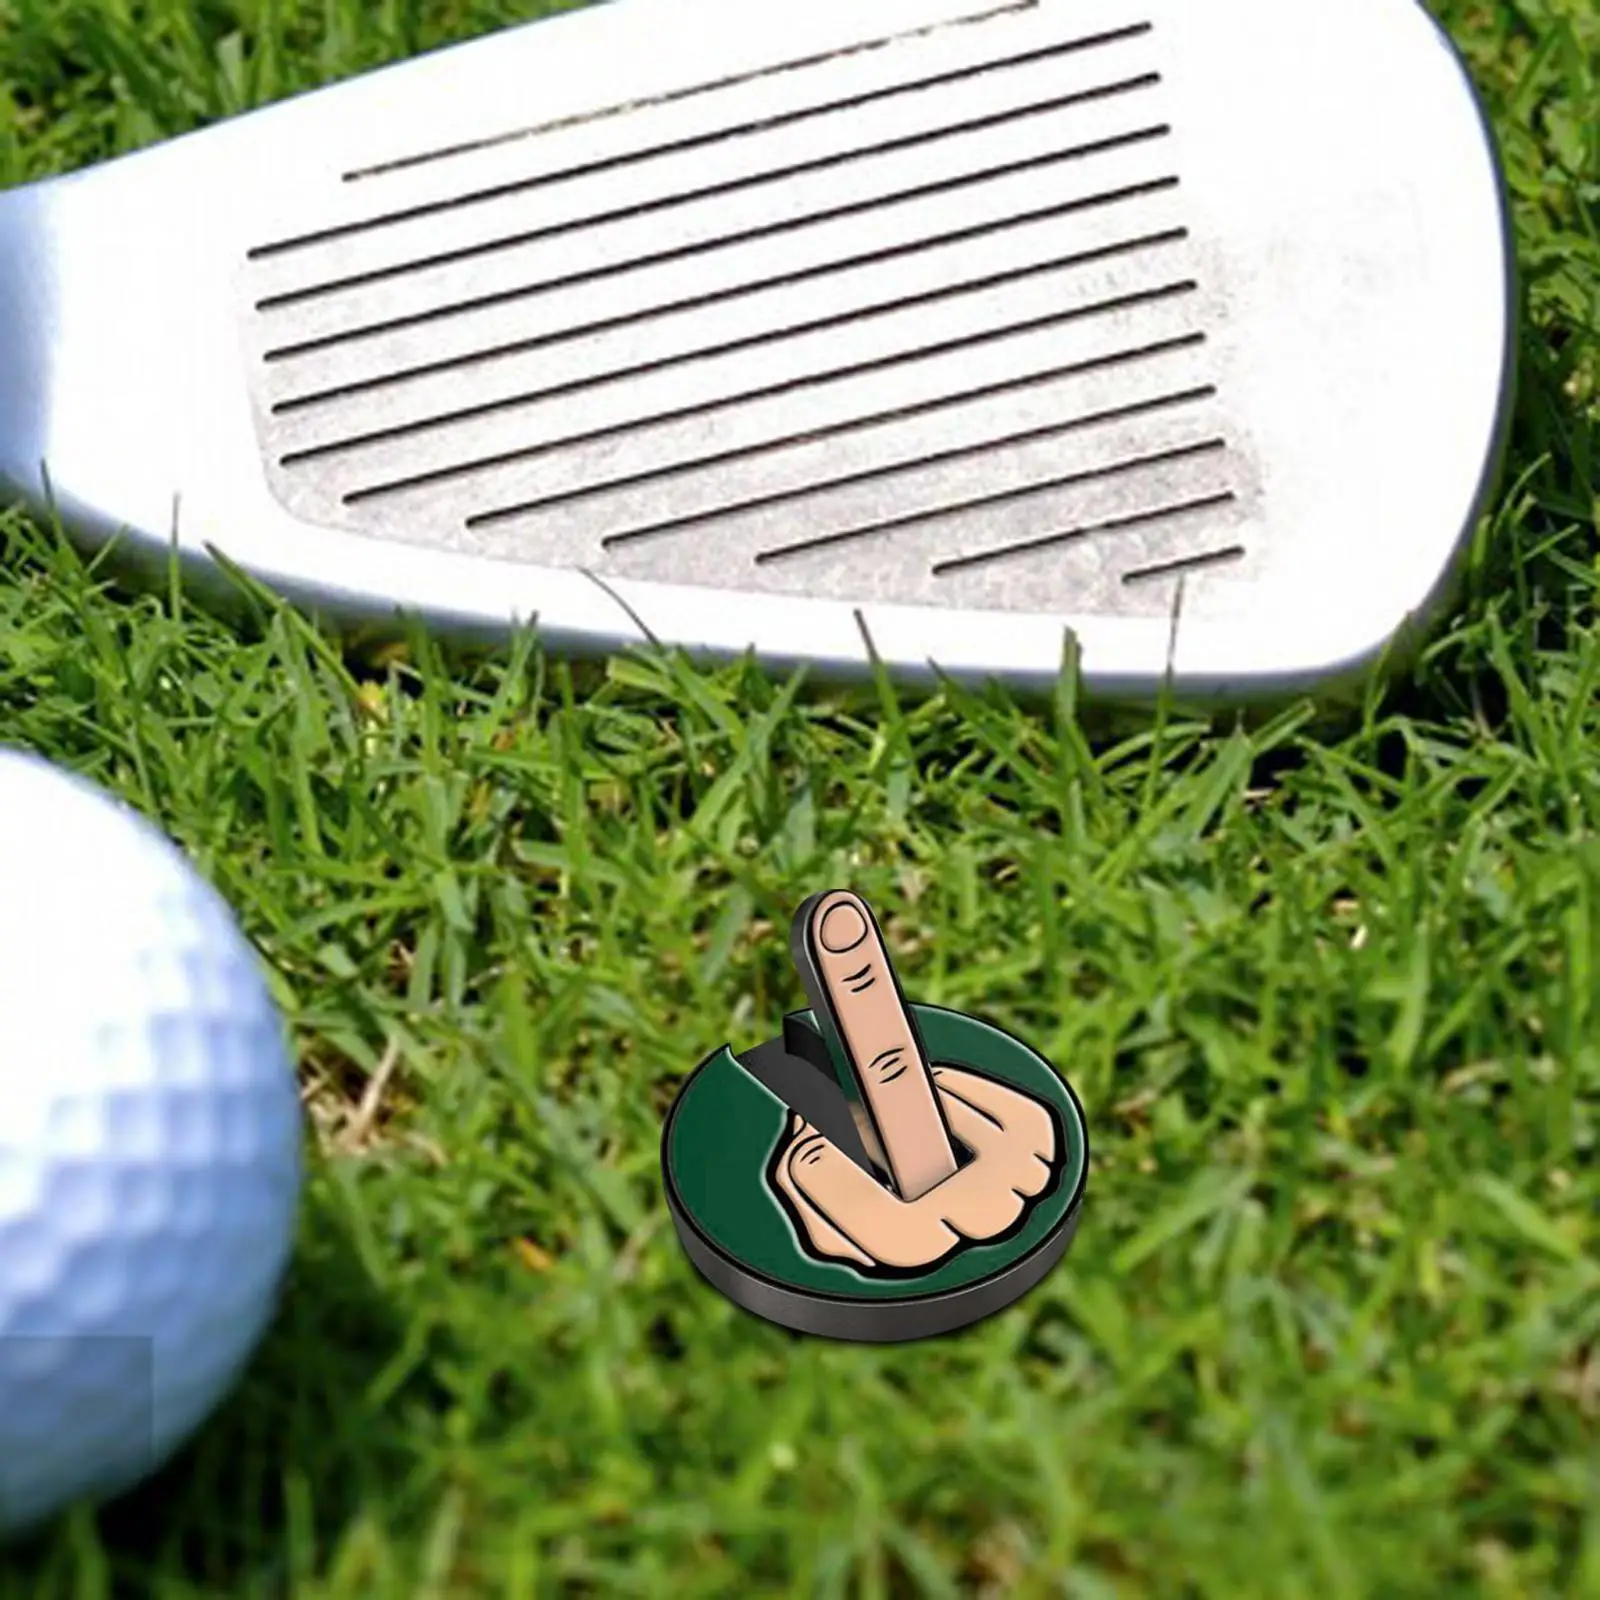 Funny Middle Finger Theme Golf Ball Marker Golf Accessories, Diameter 2.5cm